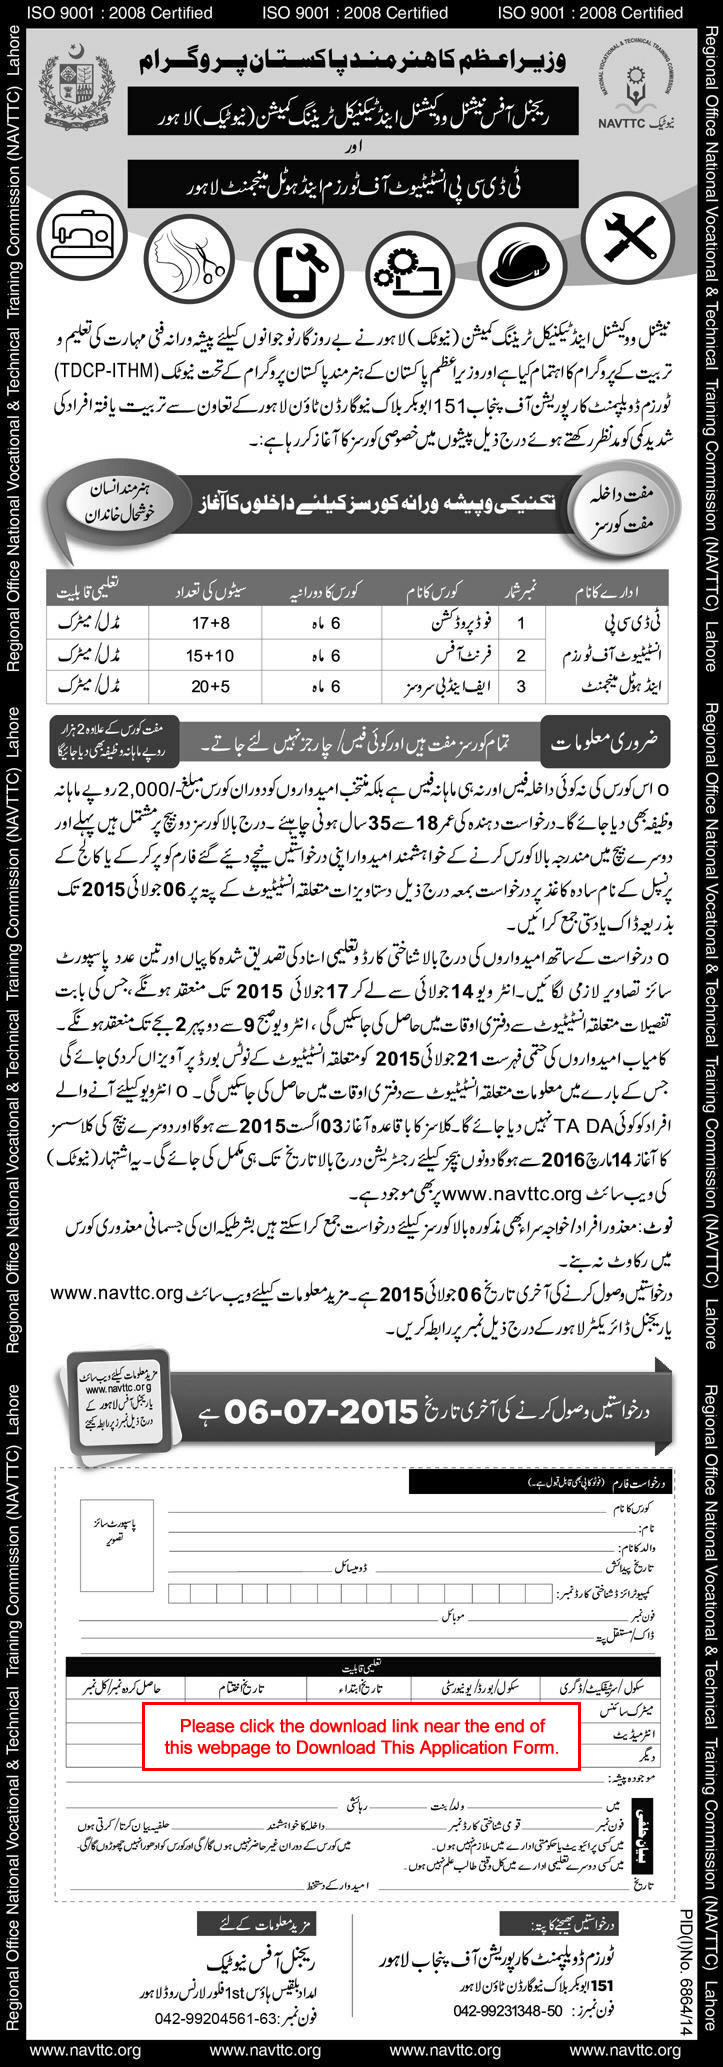 Free Courses in TDCP Institute of Tourism & Hotel Management Lahore 2015 June NAVTTC Application Form